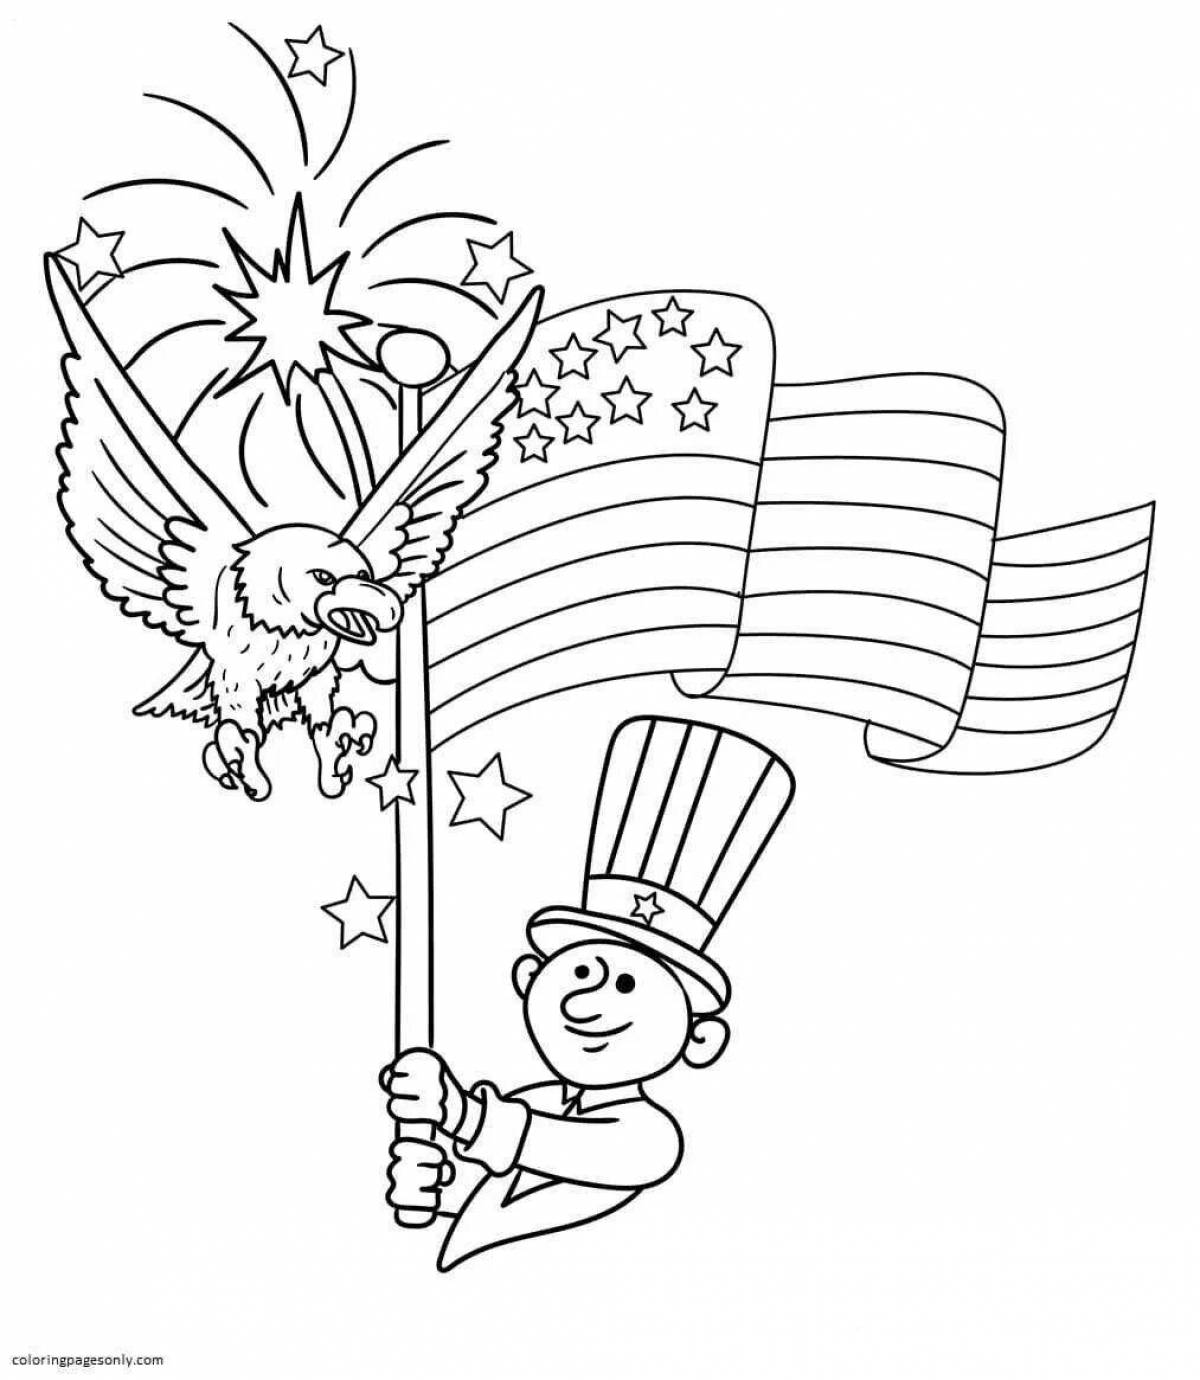 Sublime patriotic coloring book for kids